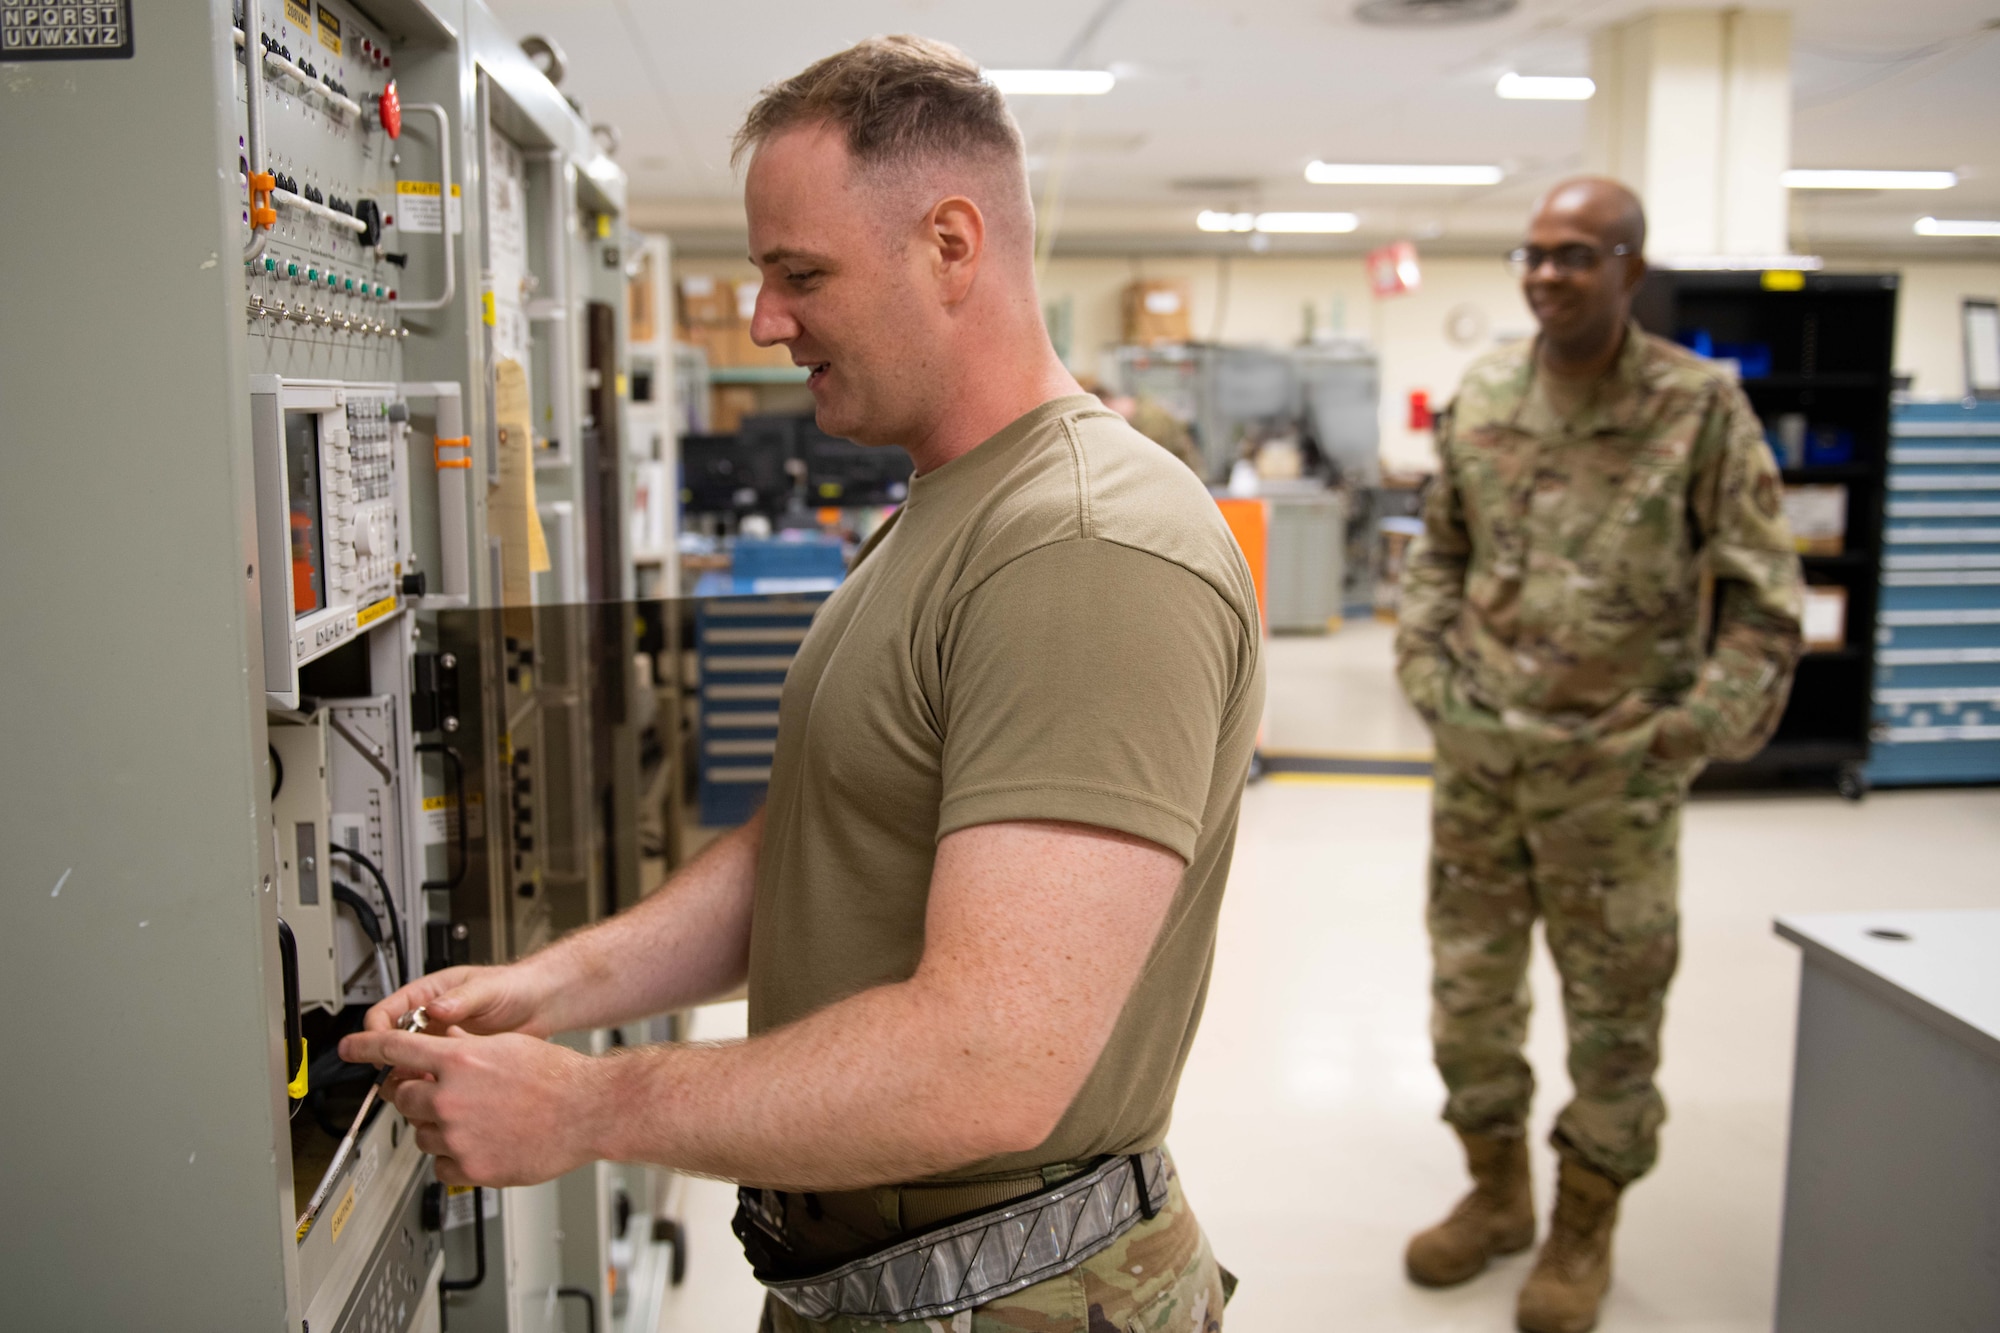 A supervisor watches as an Airman runs through the wires on an electronic unit